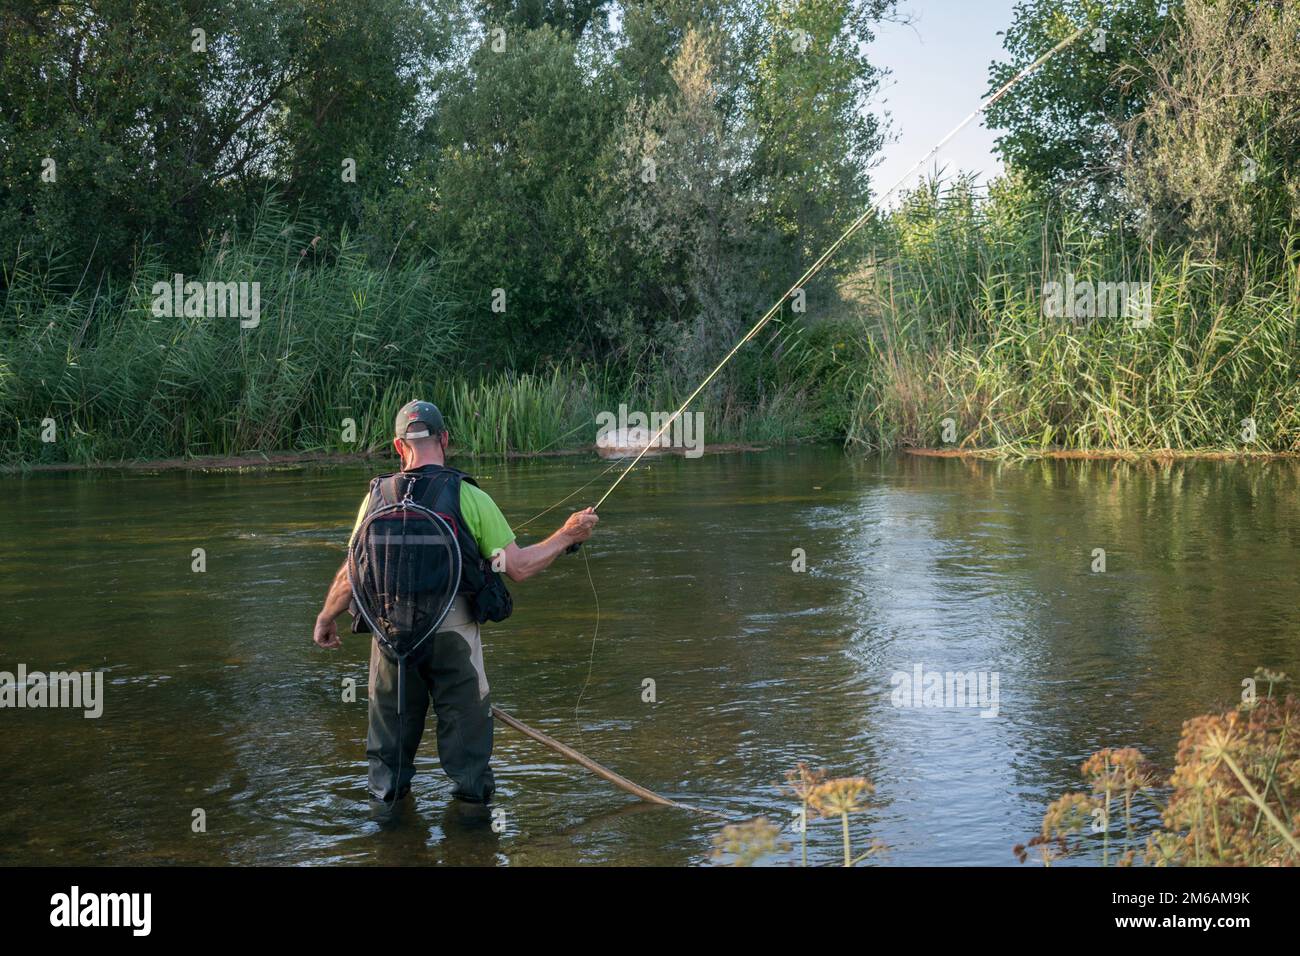 A man fishing in the river Stock Photo